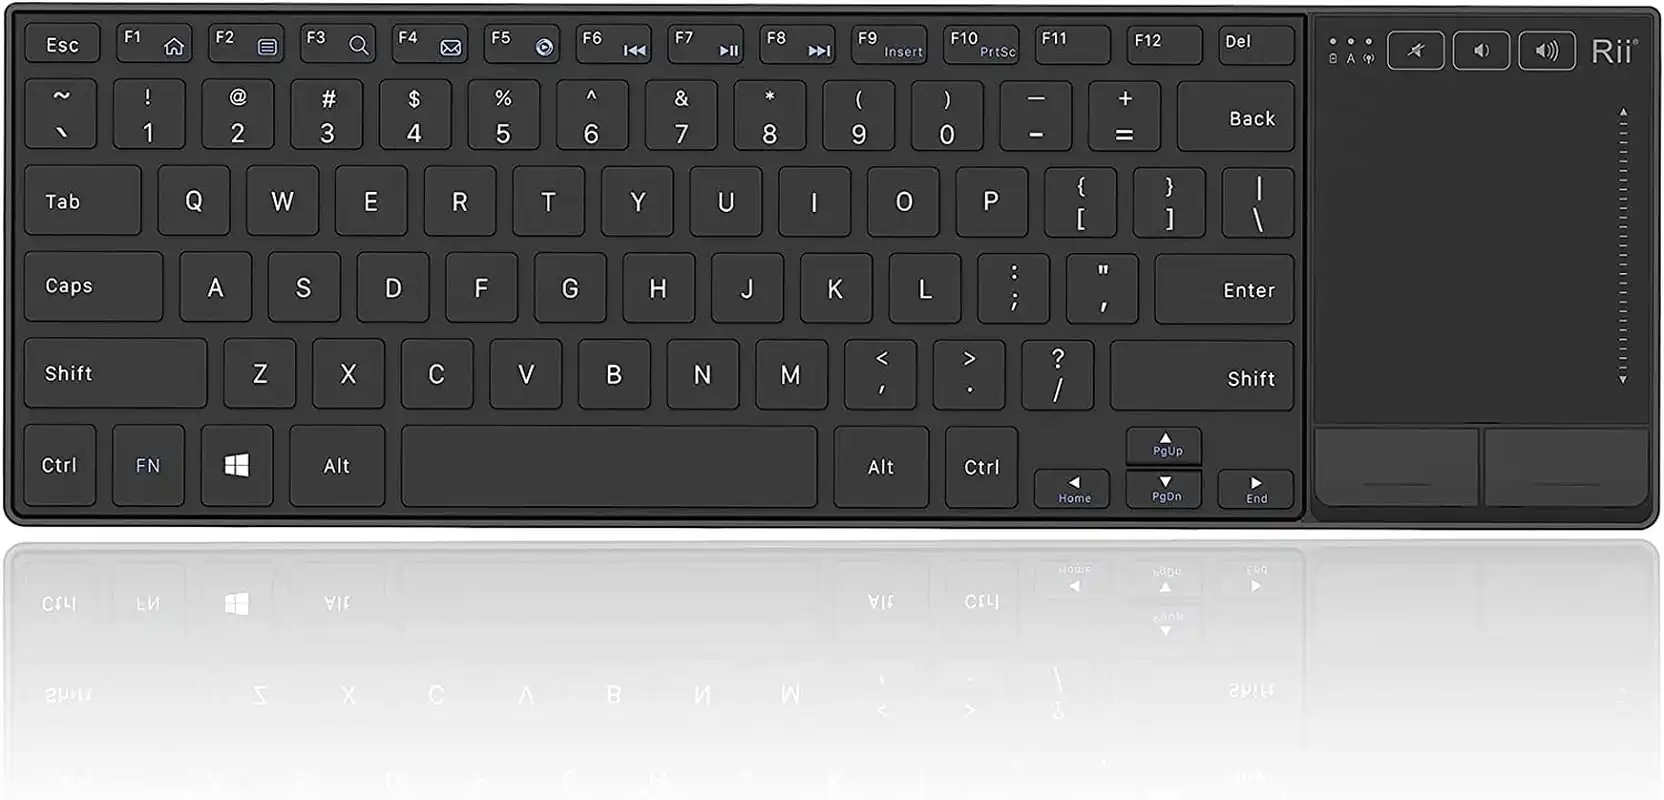 Rii K22 Wireless Keyboard for Windows,Ultra Slim Silent Keyboard with Touchpad,2.4 Ghz Wireless Computer Keyboard,Compatible with PC, Laptop